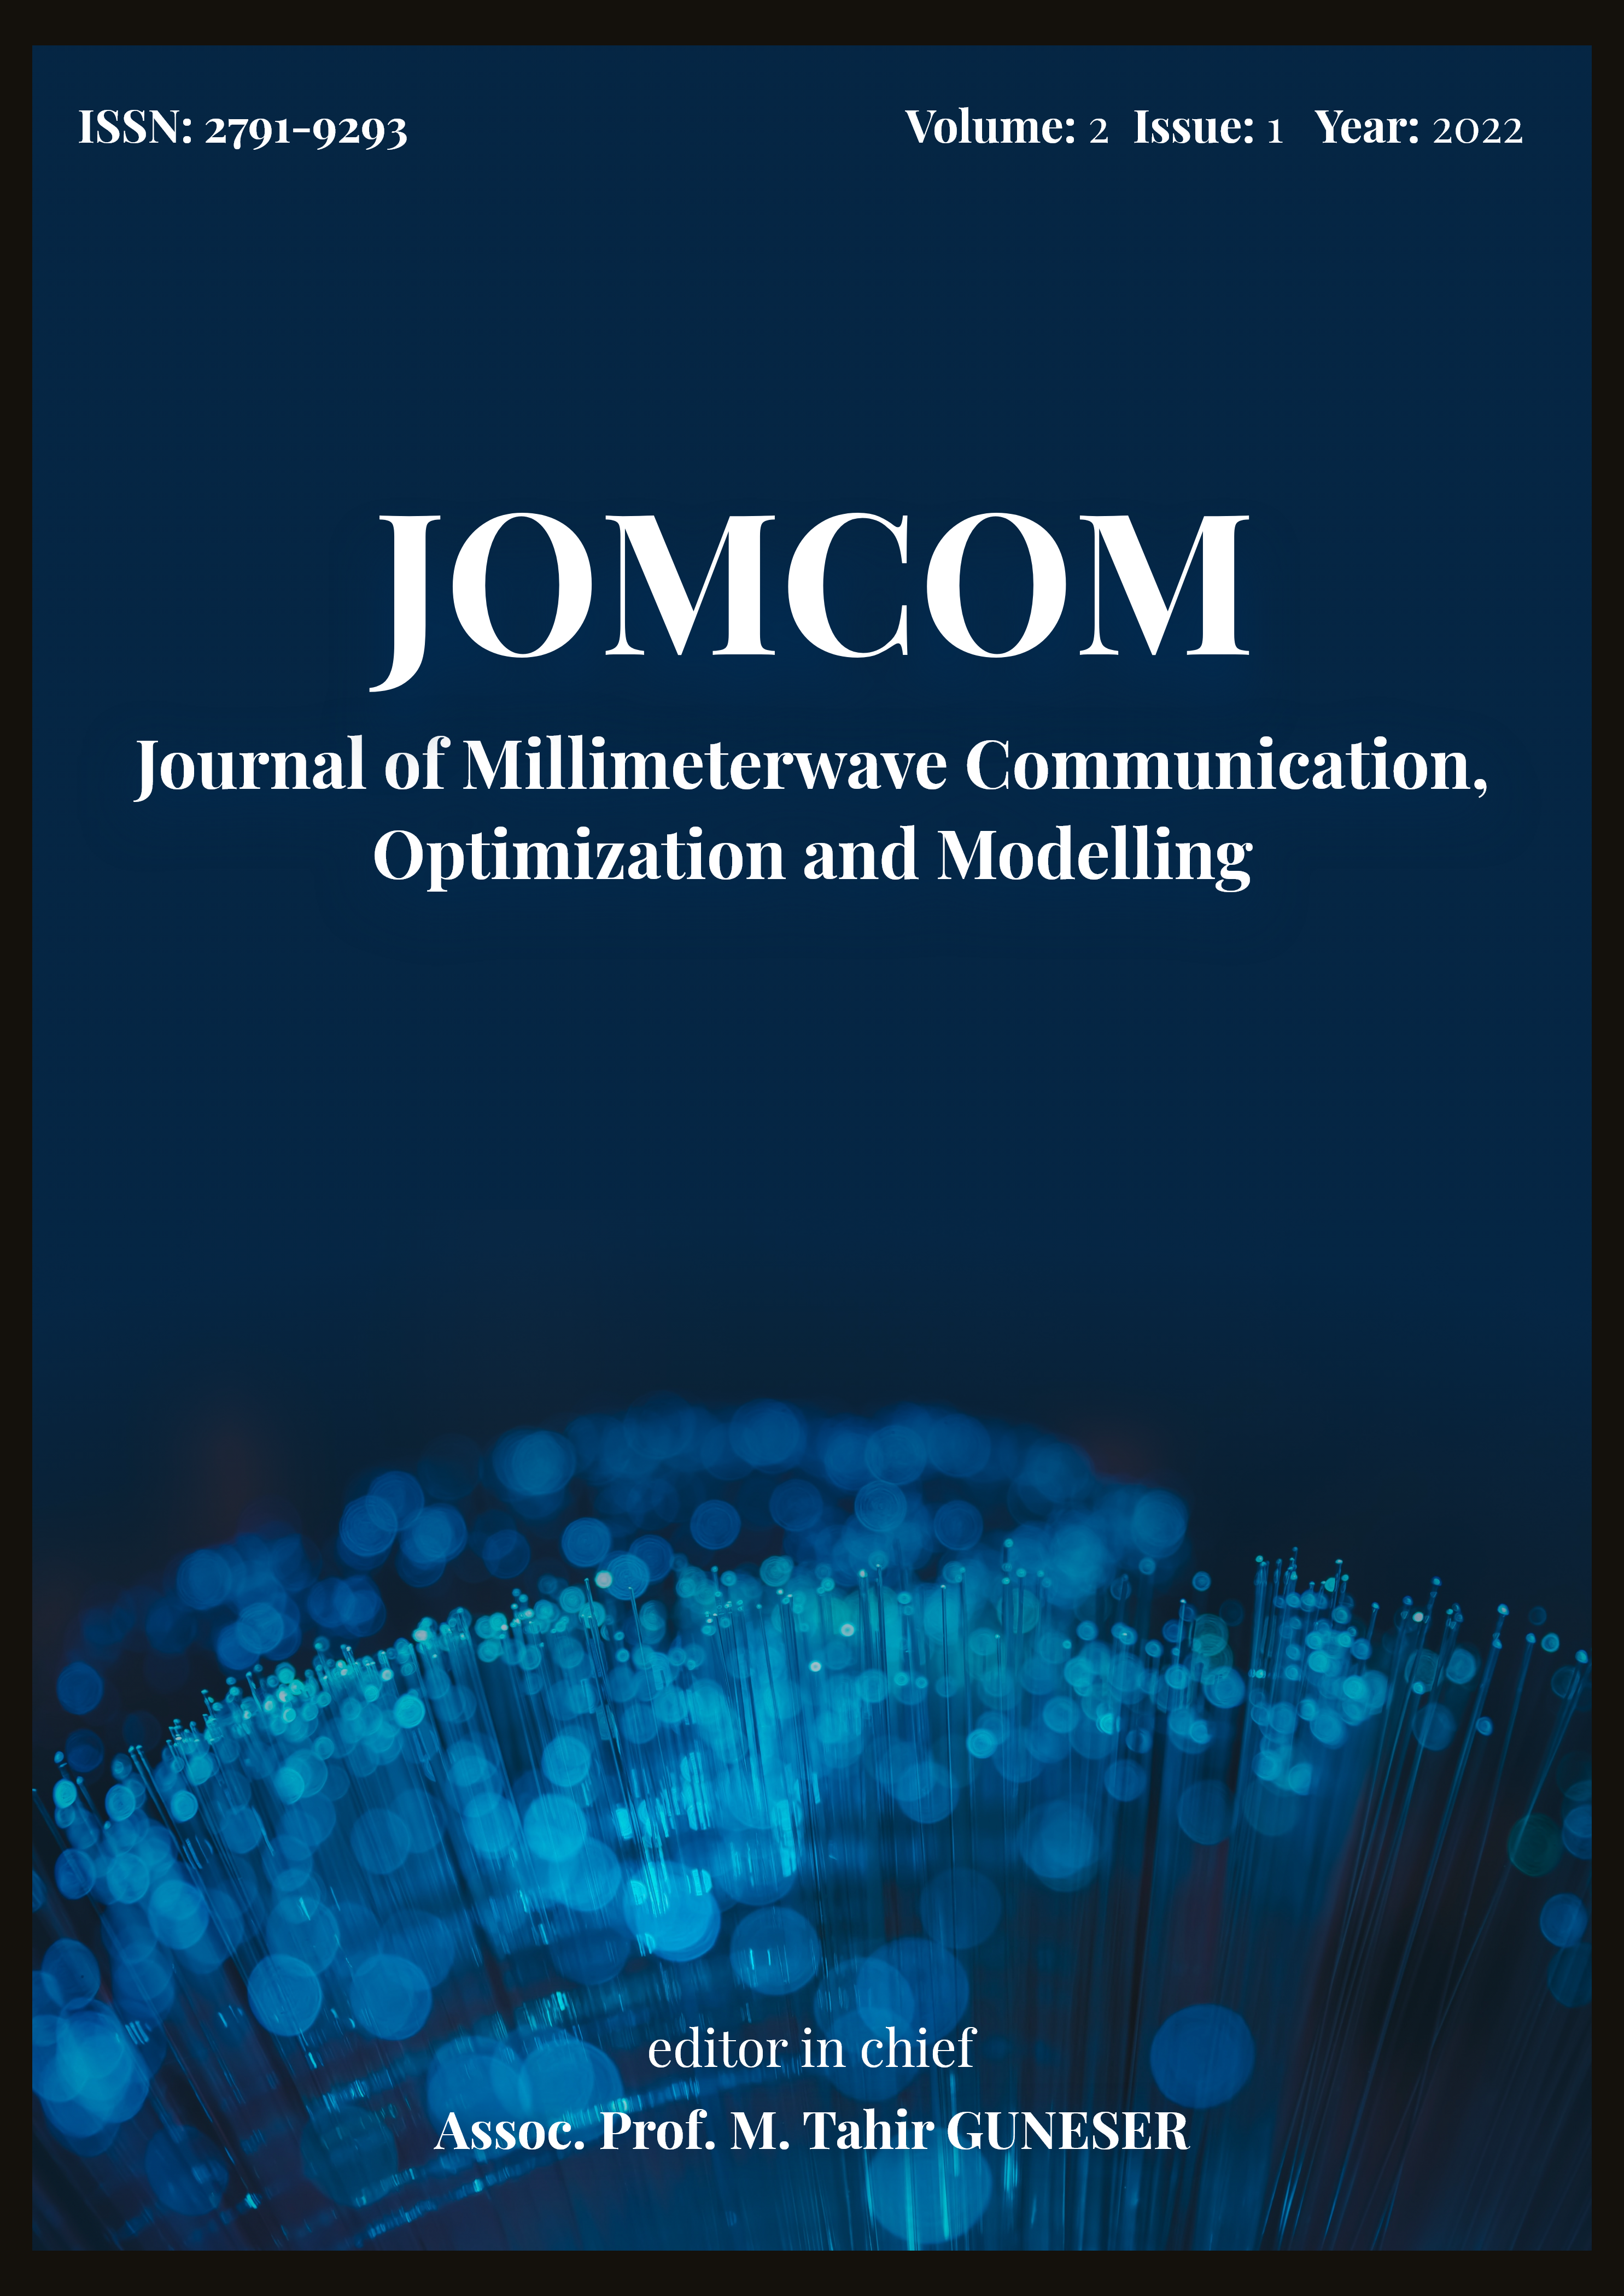 cover of the peer review journal about millimeterwave, wireless communication, optimization, modelling